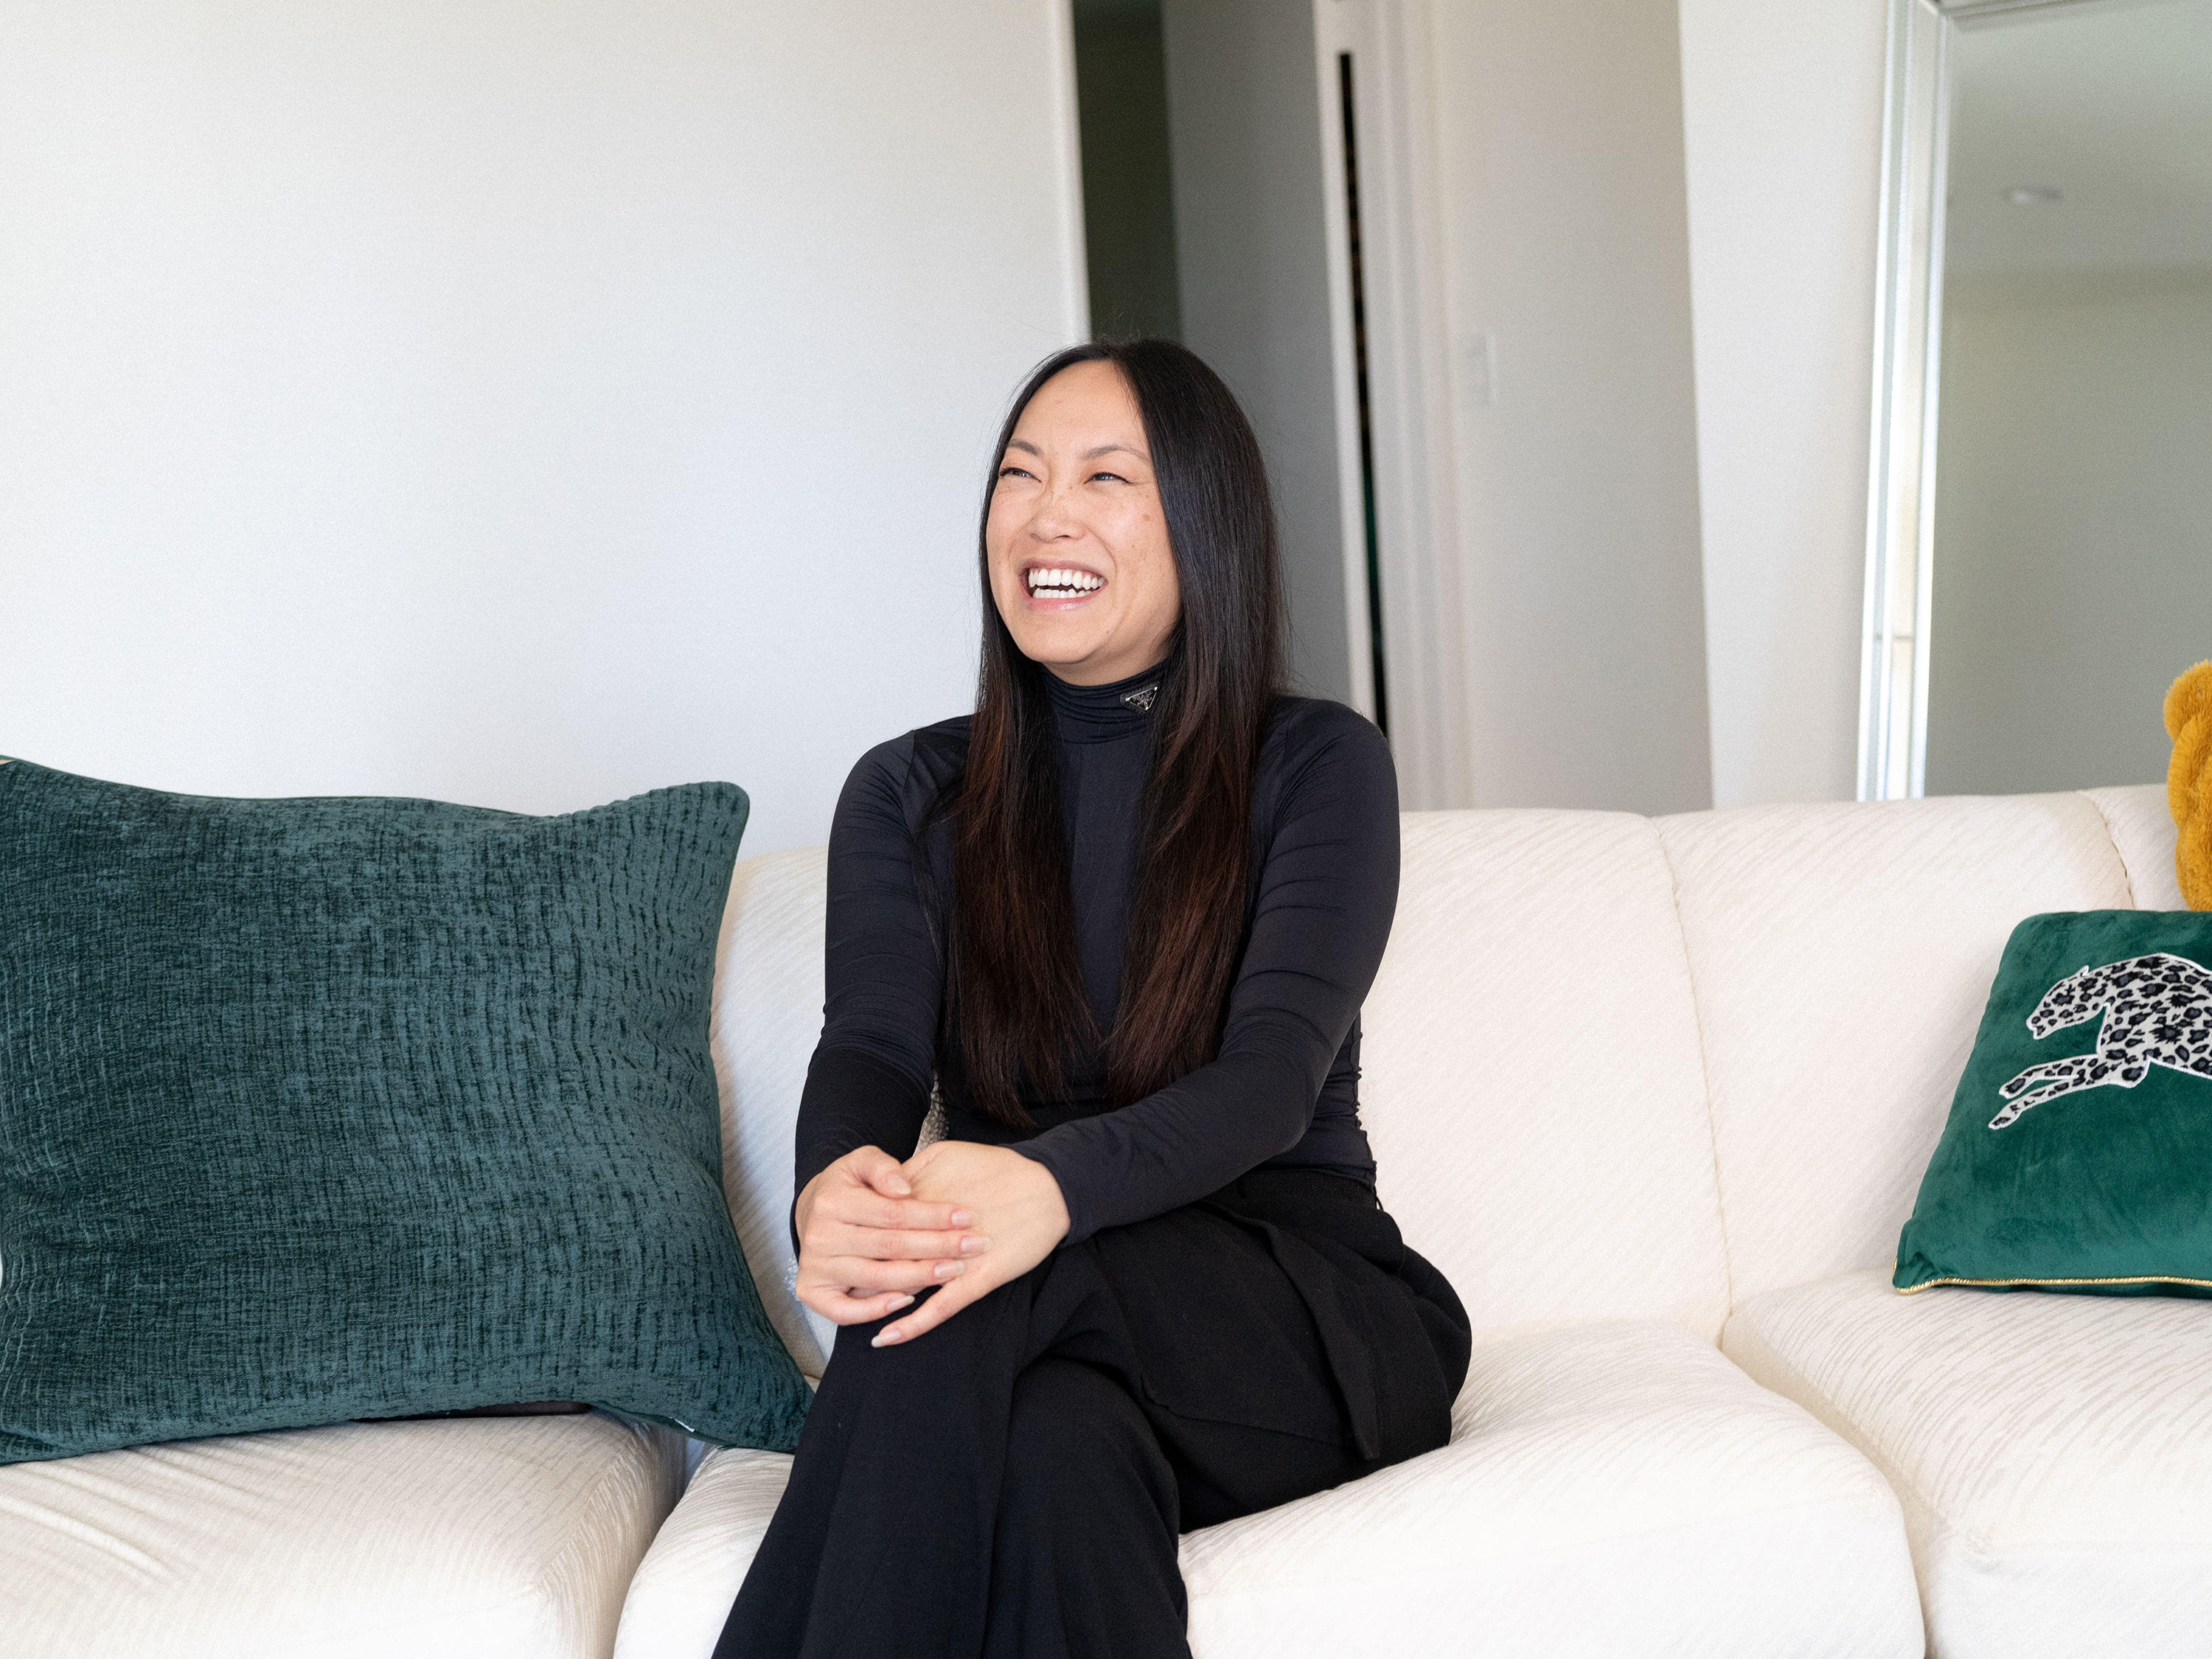 The publicist and founder of SixTen PR, Jen Woodward, smiling while sitting on her living room couch